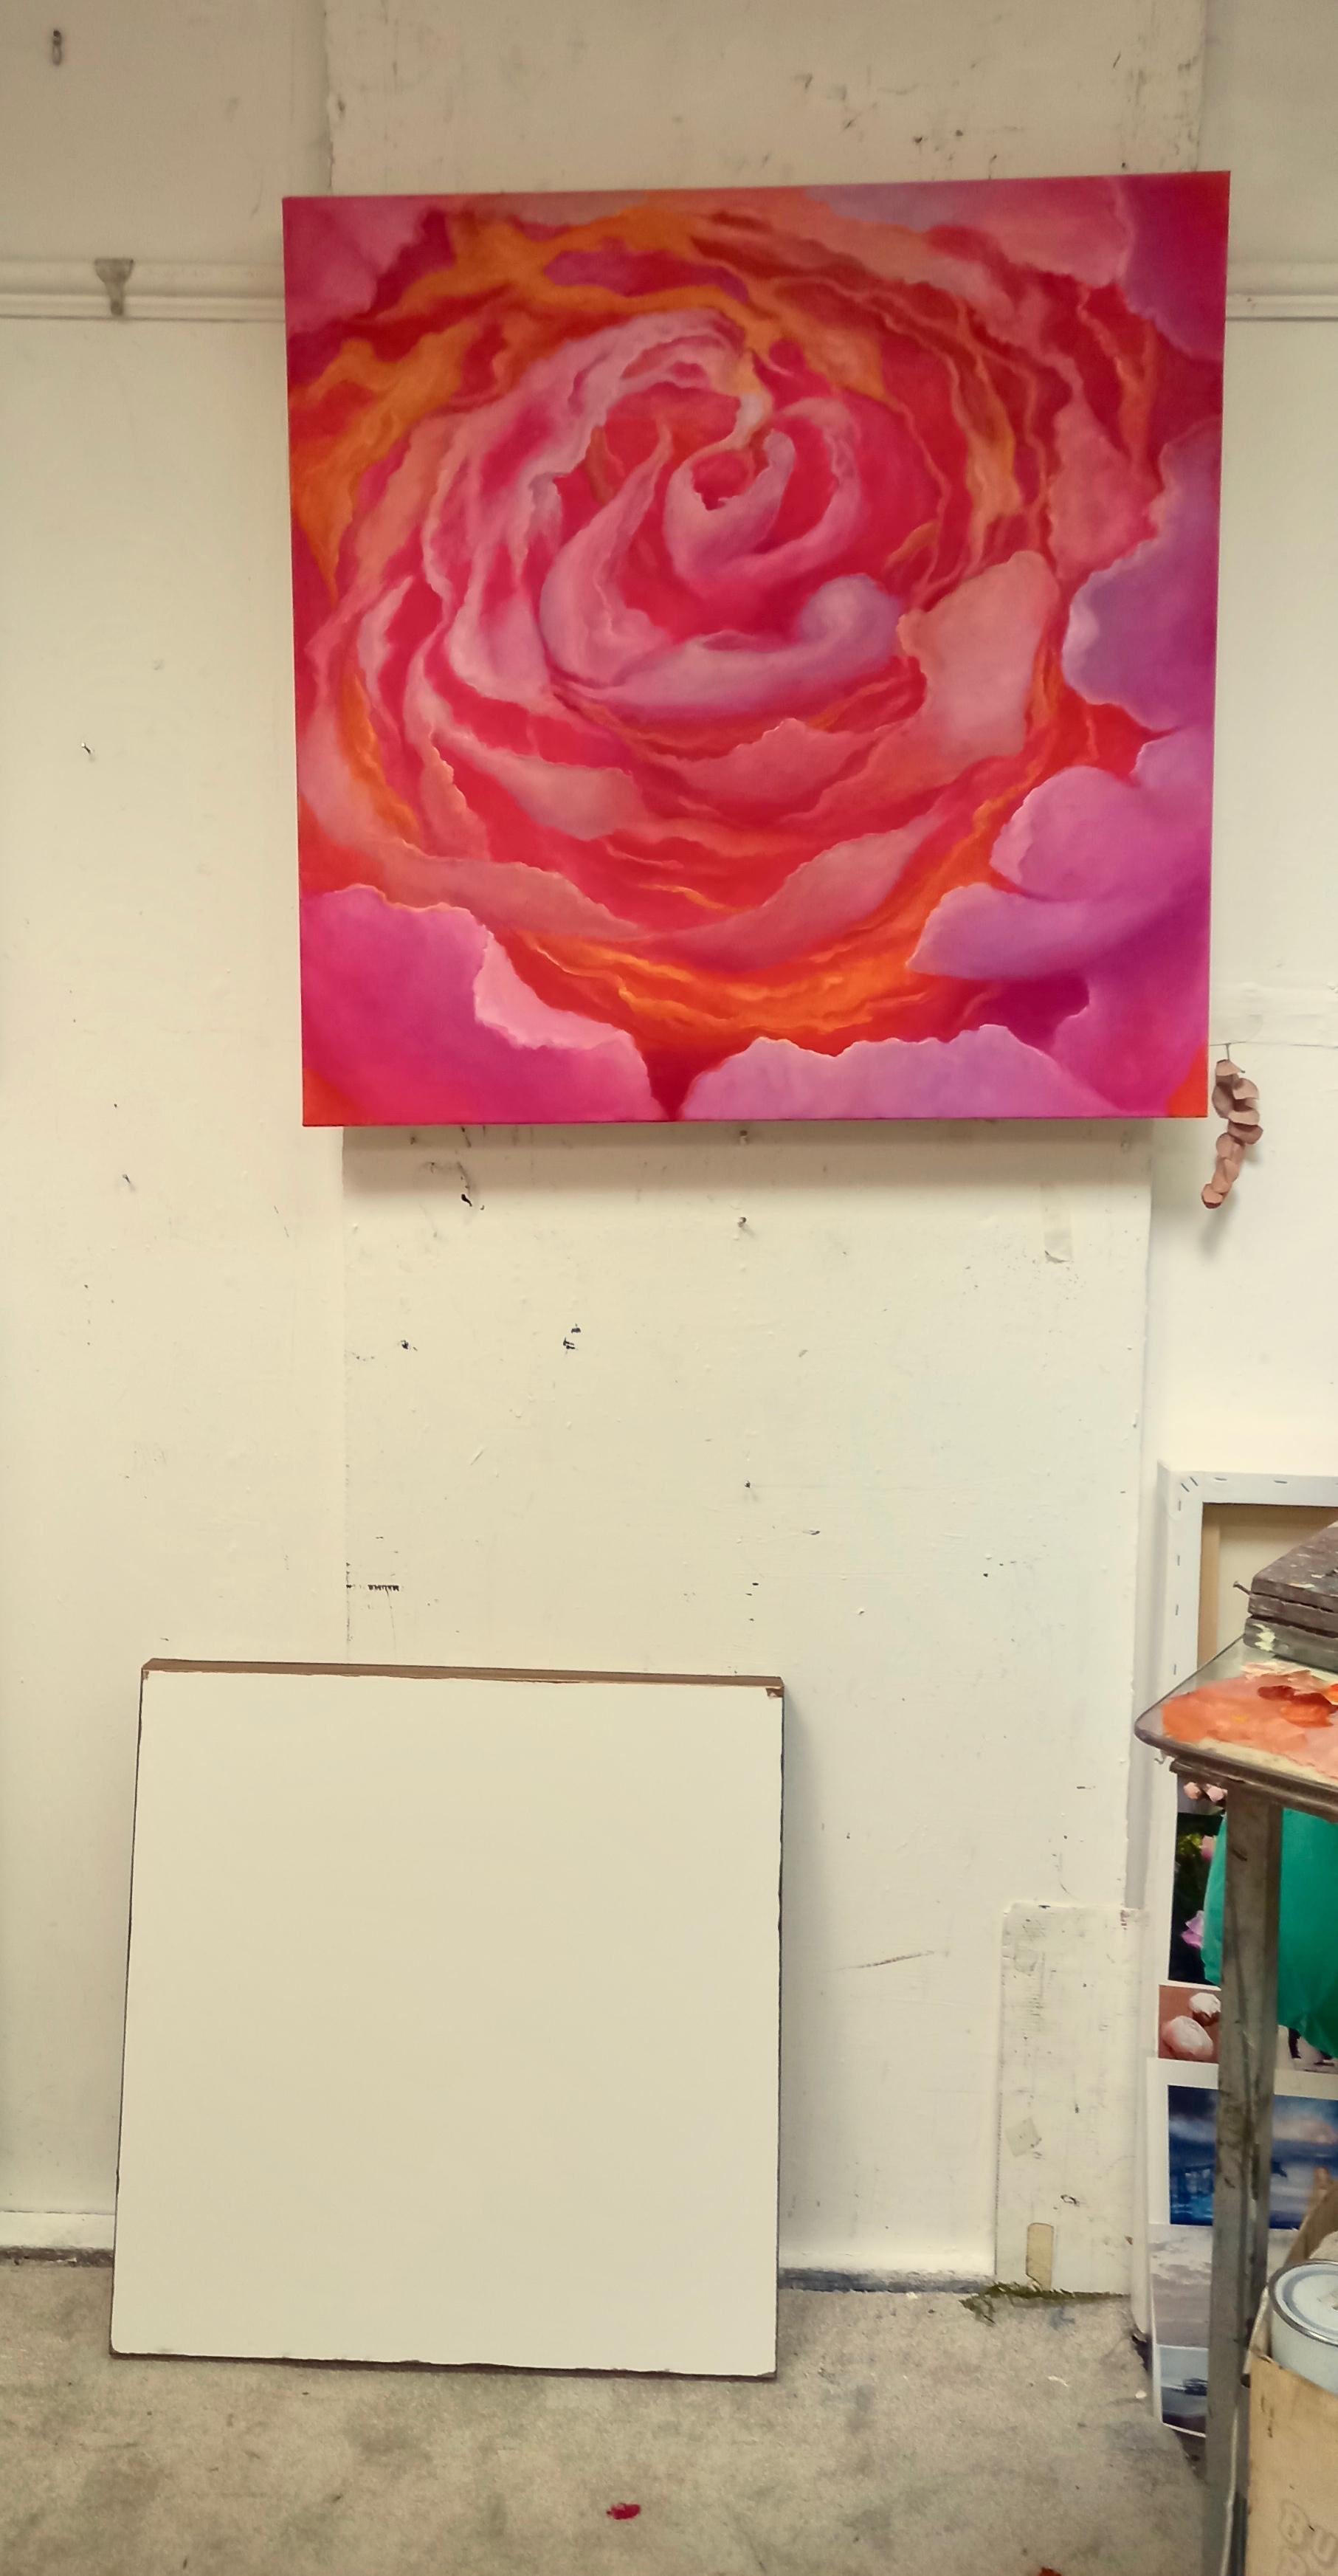 Rose Dorè, Contemporary Signed Original Pink Rose Flower Oil Painting on Canvas 1